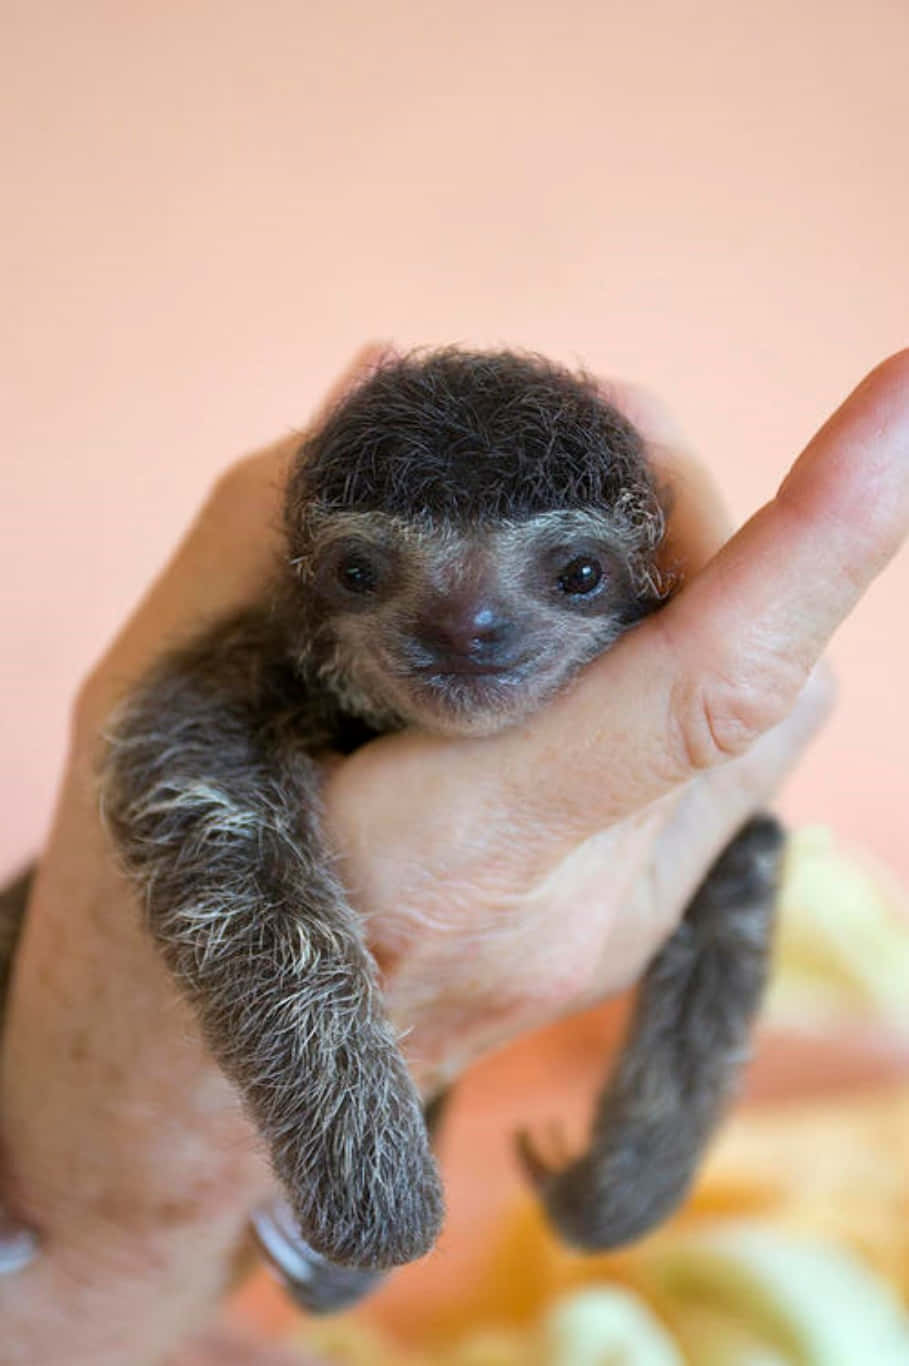 Look at this adorable baby sloth!